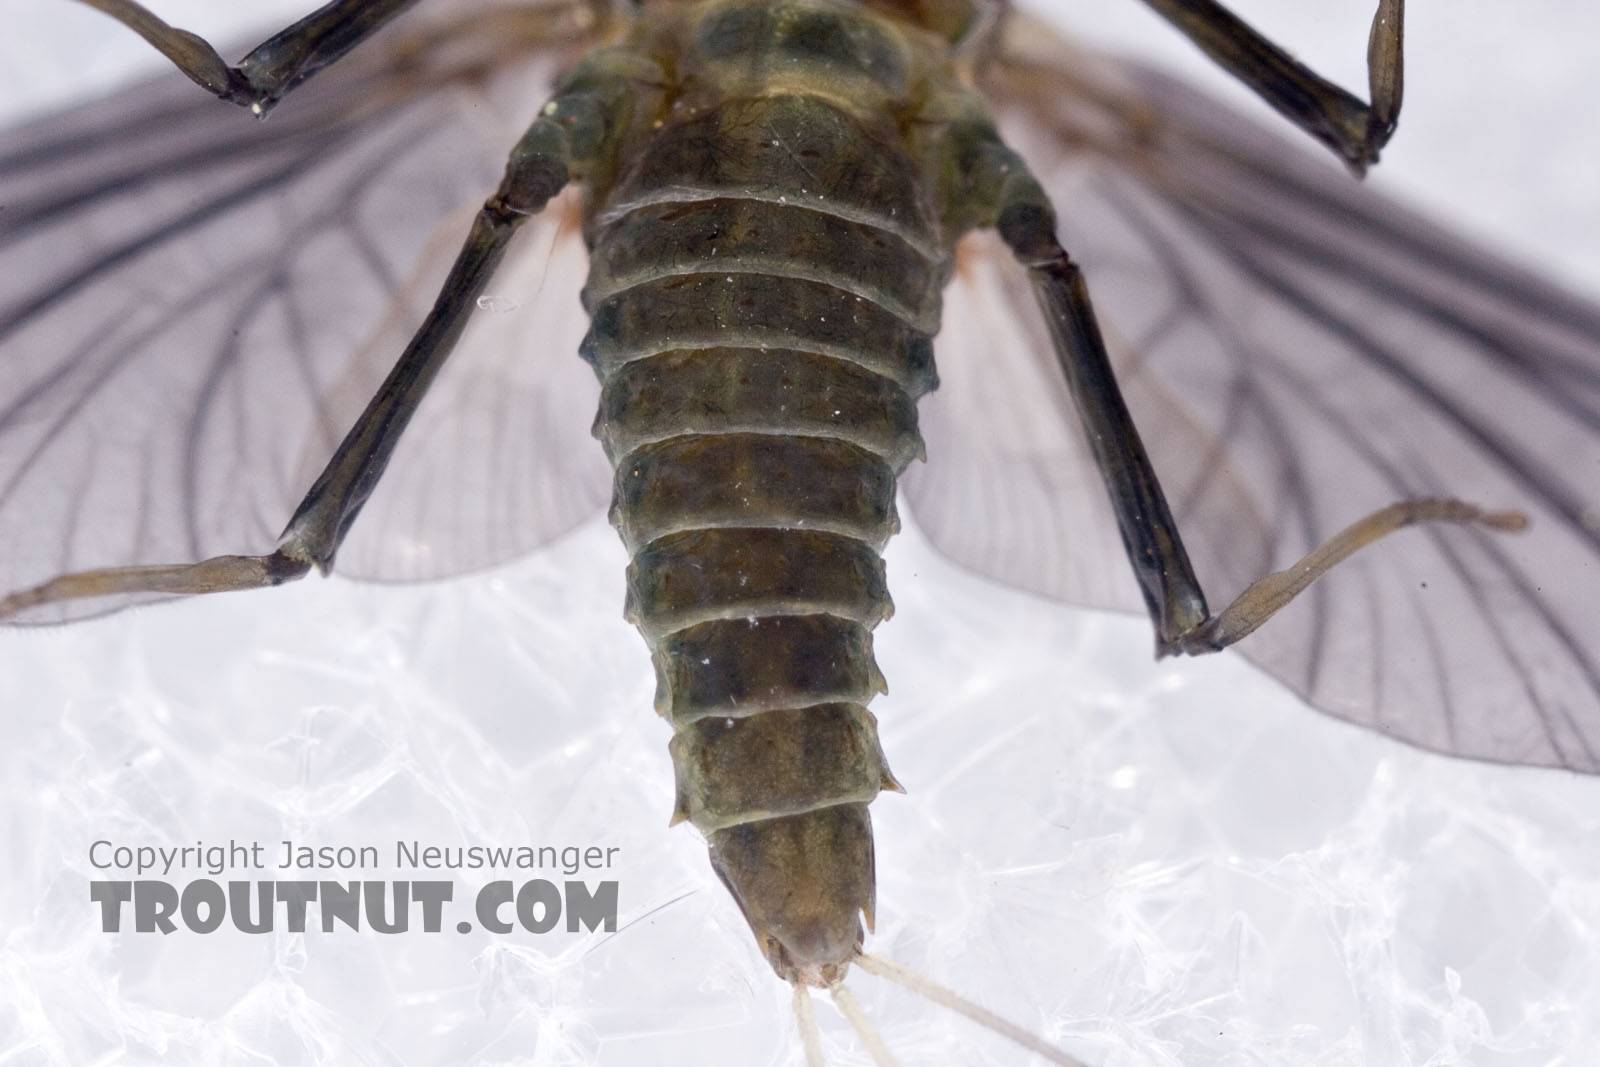 Female Drunella tuberculata Mayfly Dun from the West Branch of the Delaware River in New York